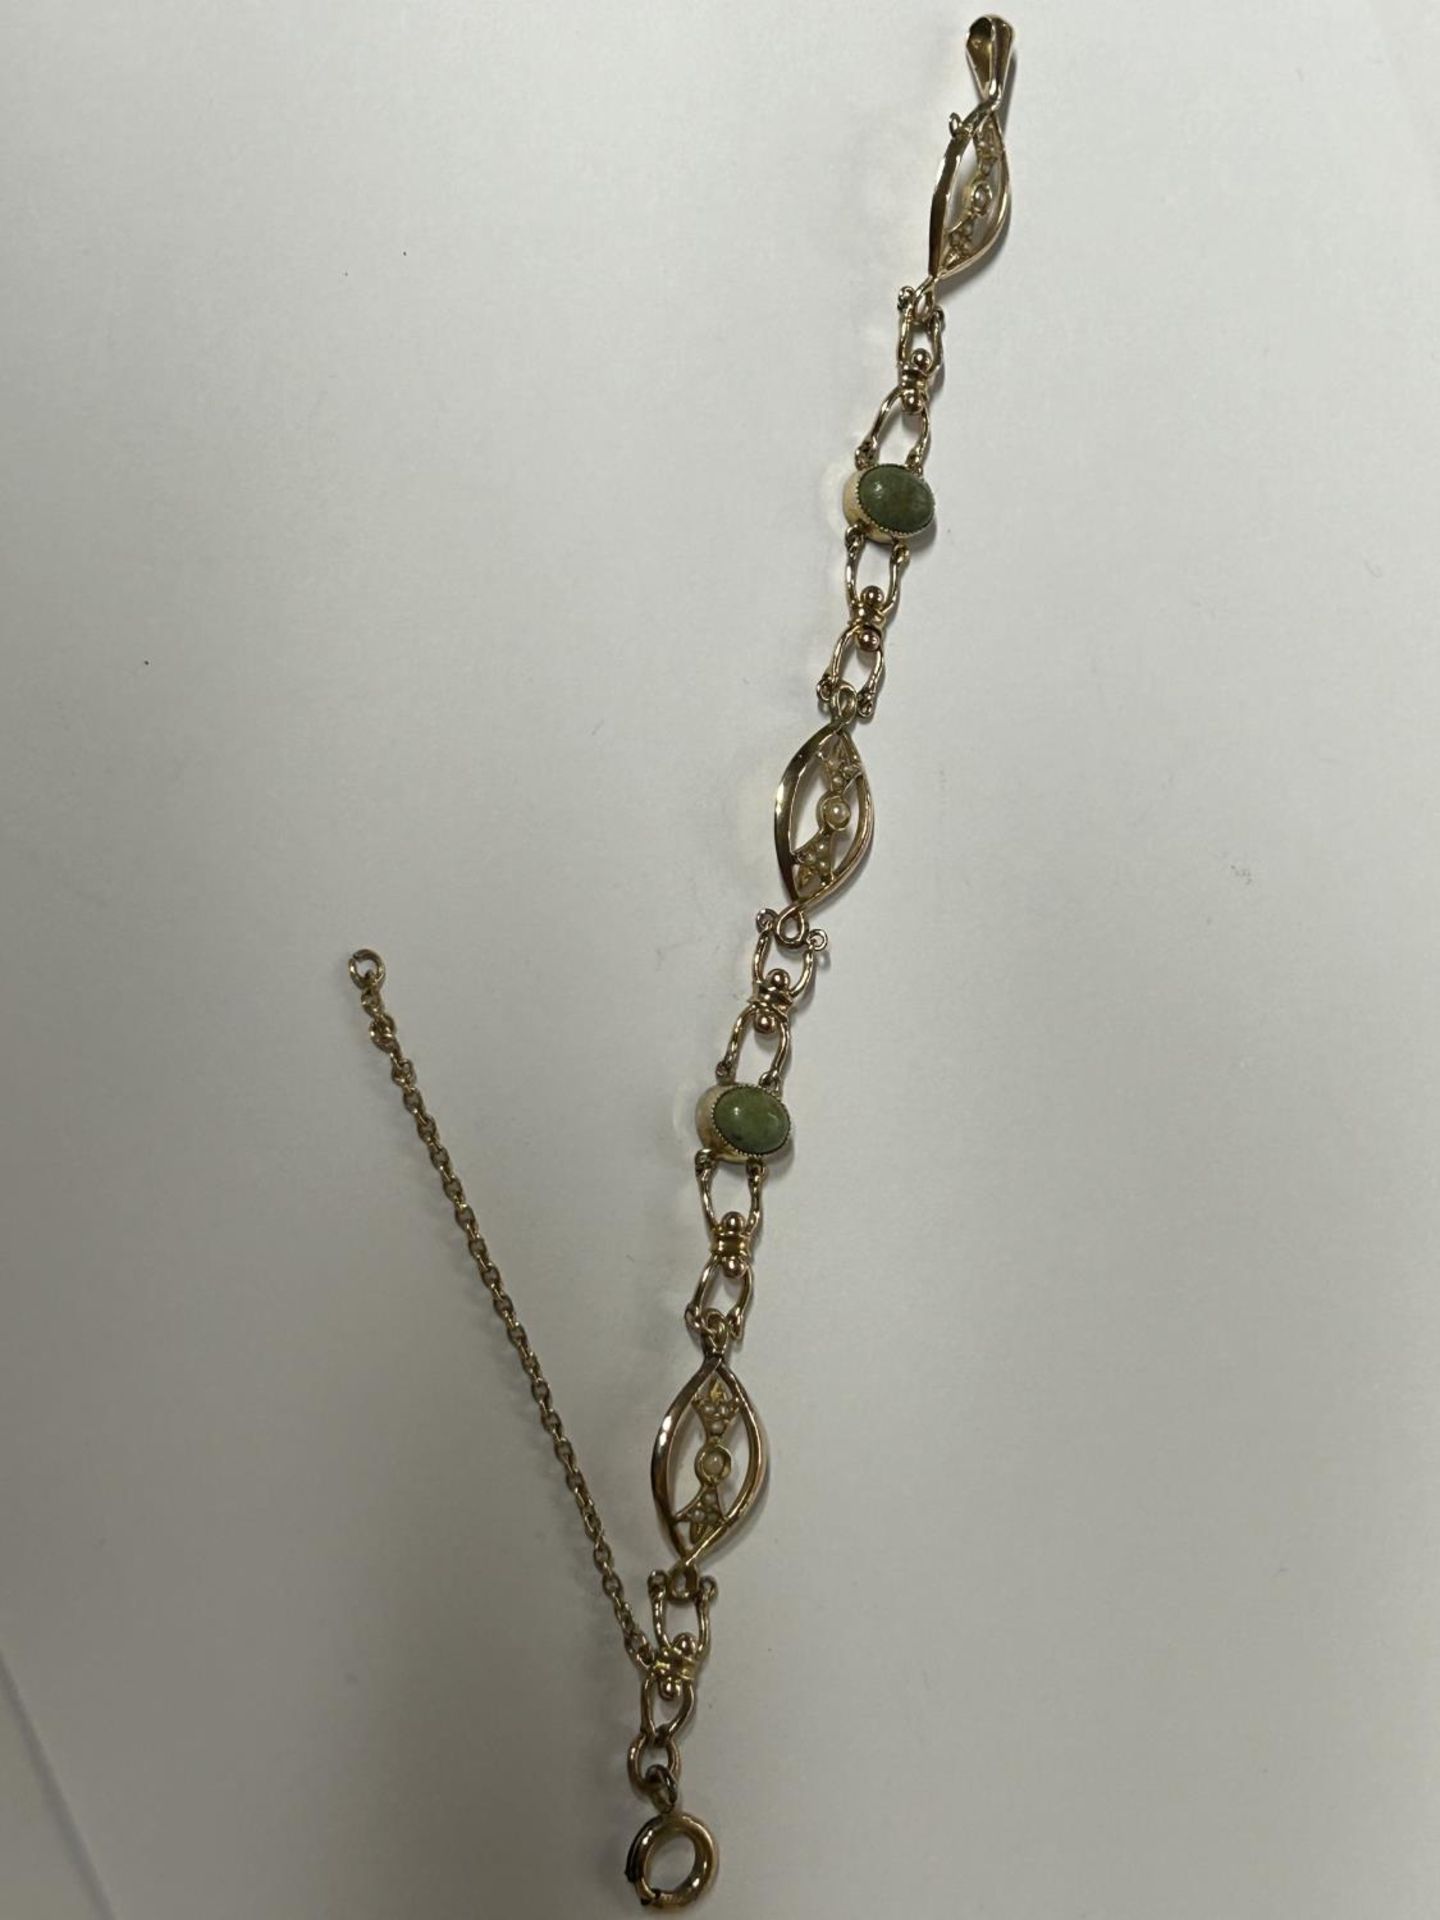 A VINTAGE 9CT YELLOW GOLD, JADE AND PEARL BRACELET WITH SAFETY CHAIN GROSS WEIGHT 6.35 GRAMS, LENGTH